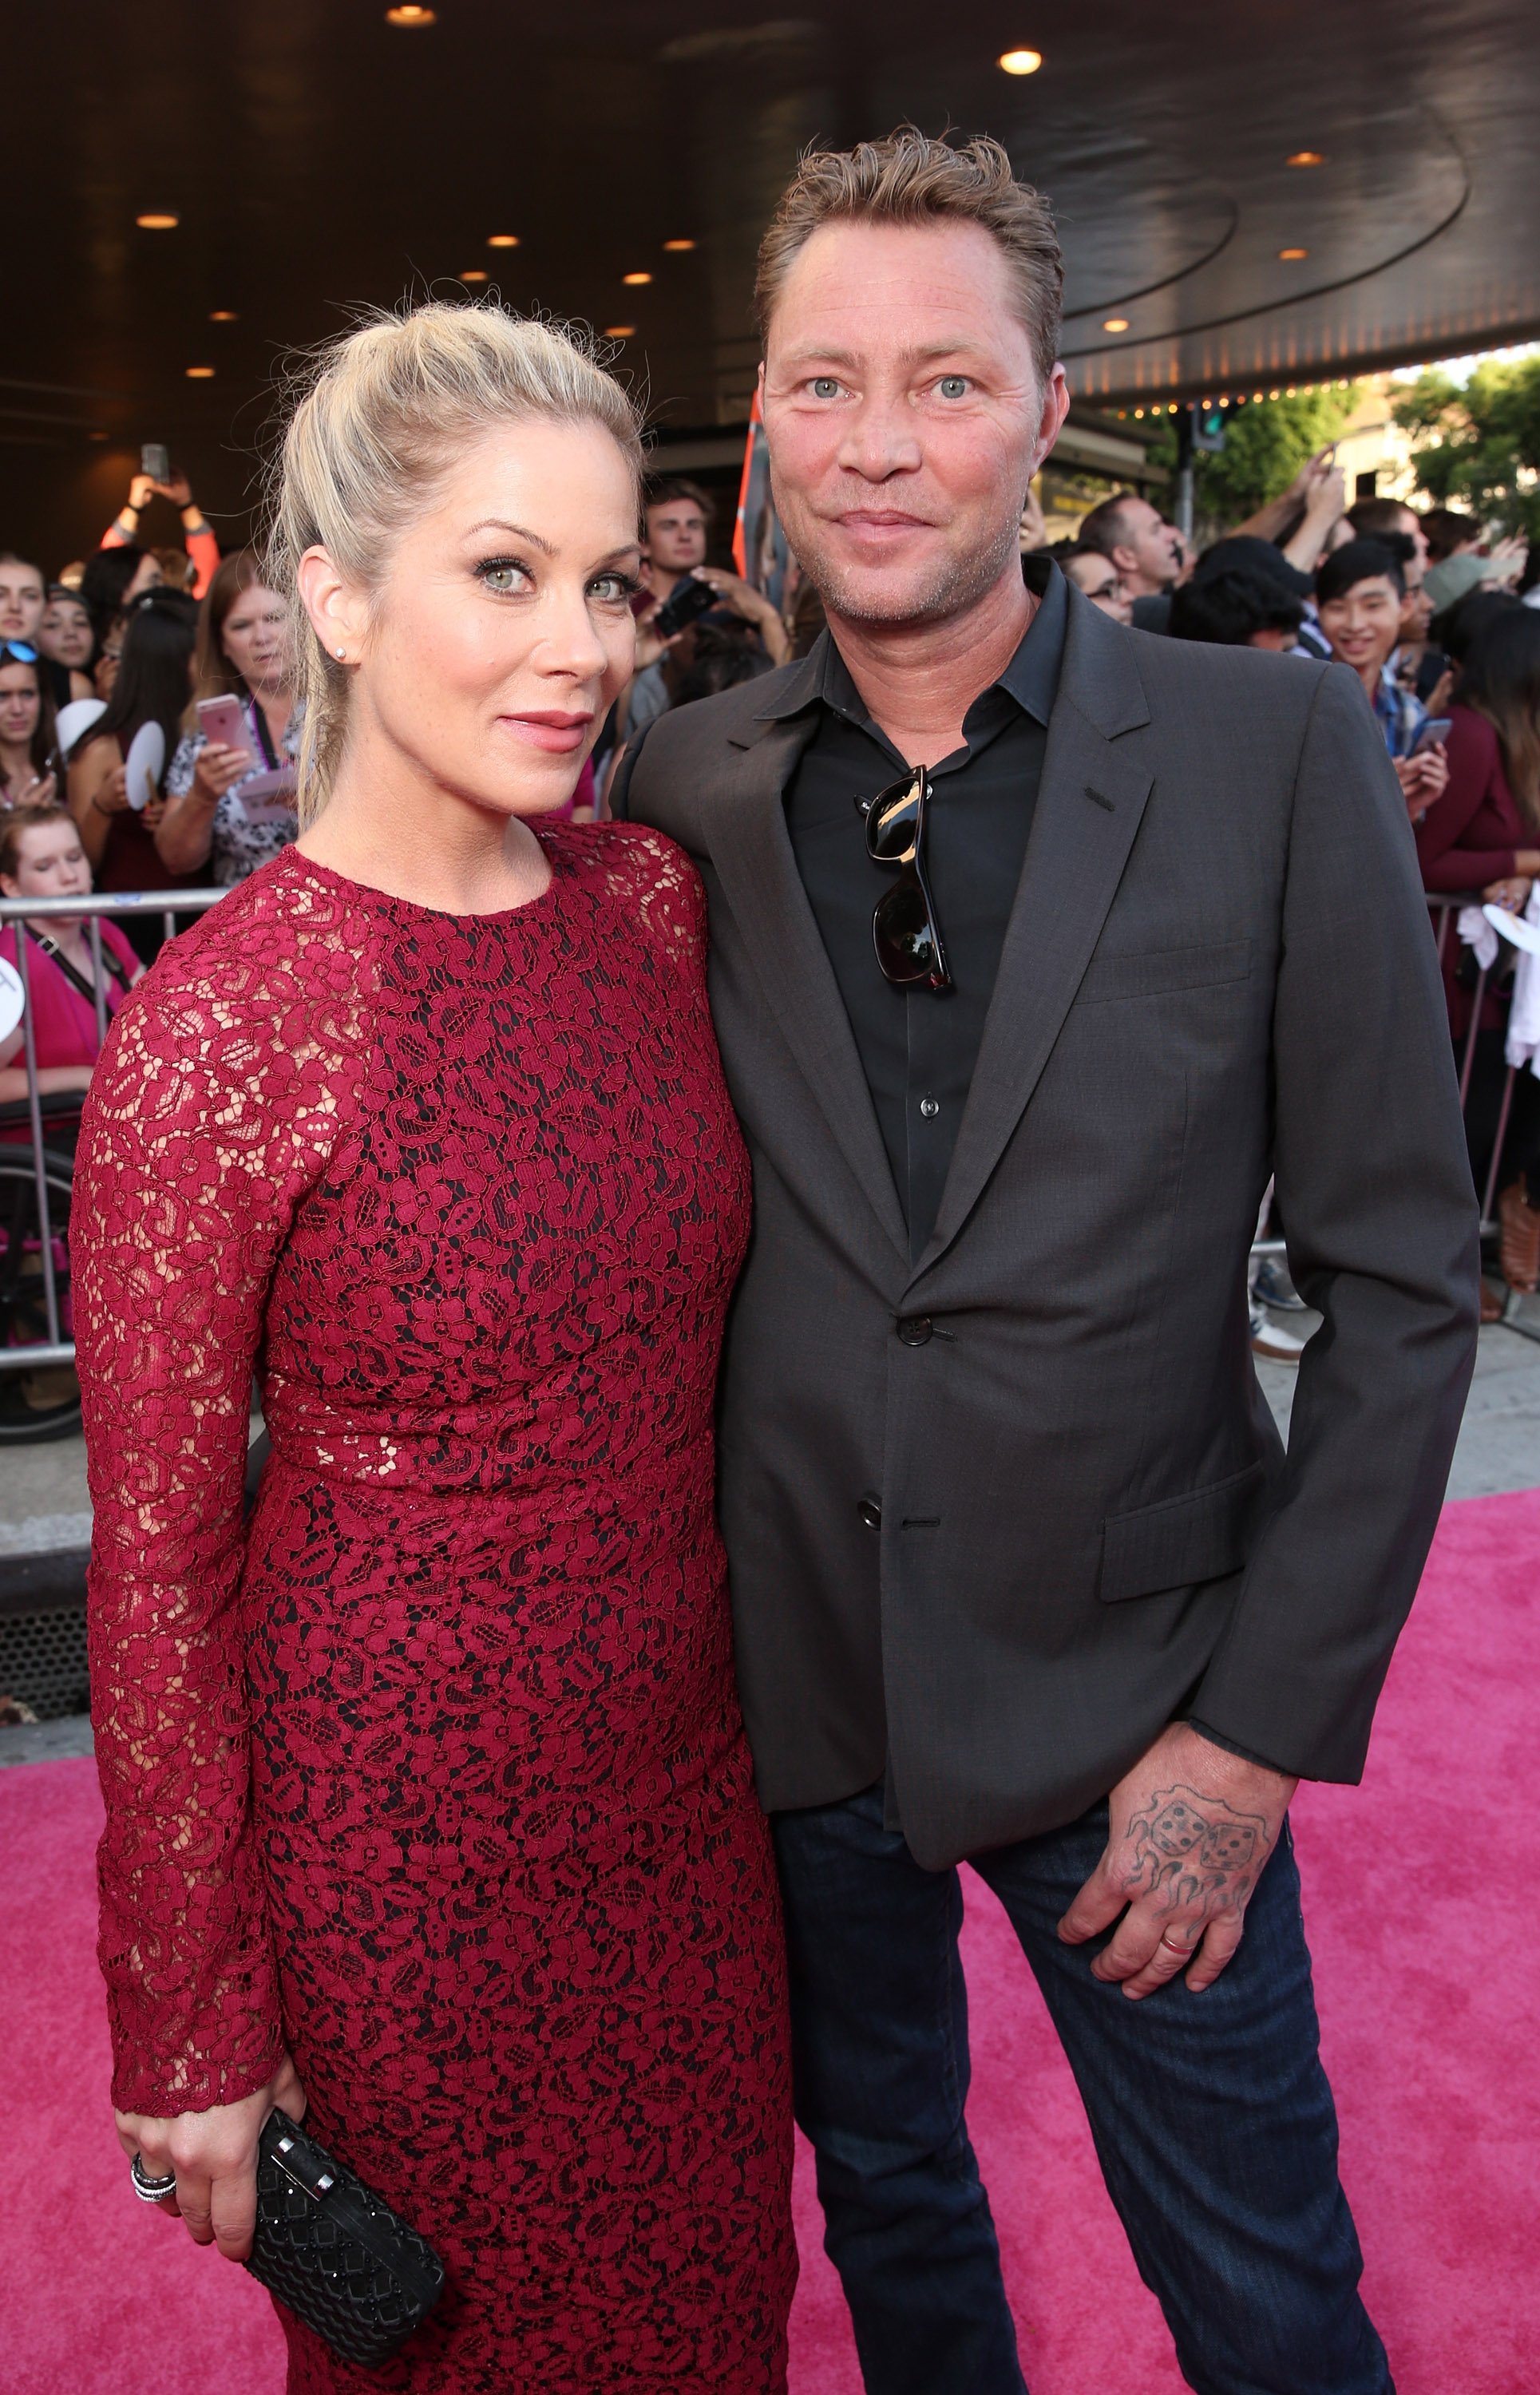  Christina Applegate and Martyn LeNoble at Mann Village Theatre on July 26, 2016 | Source: Getty Images